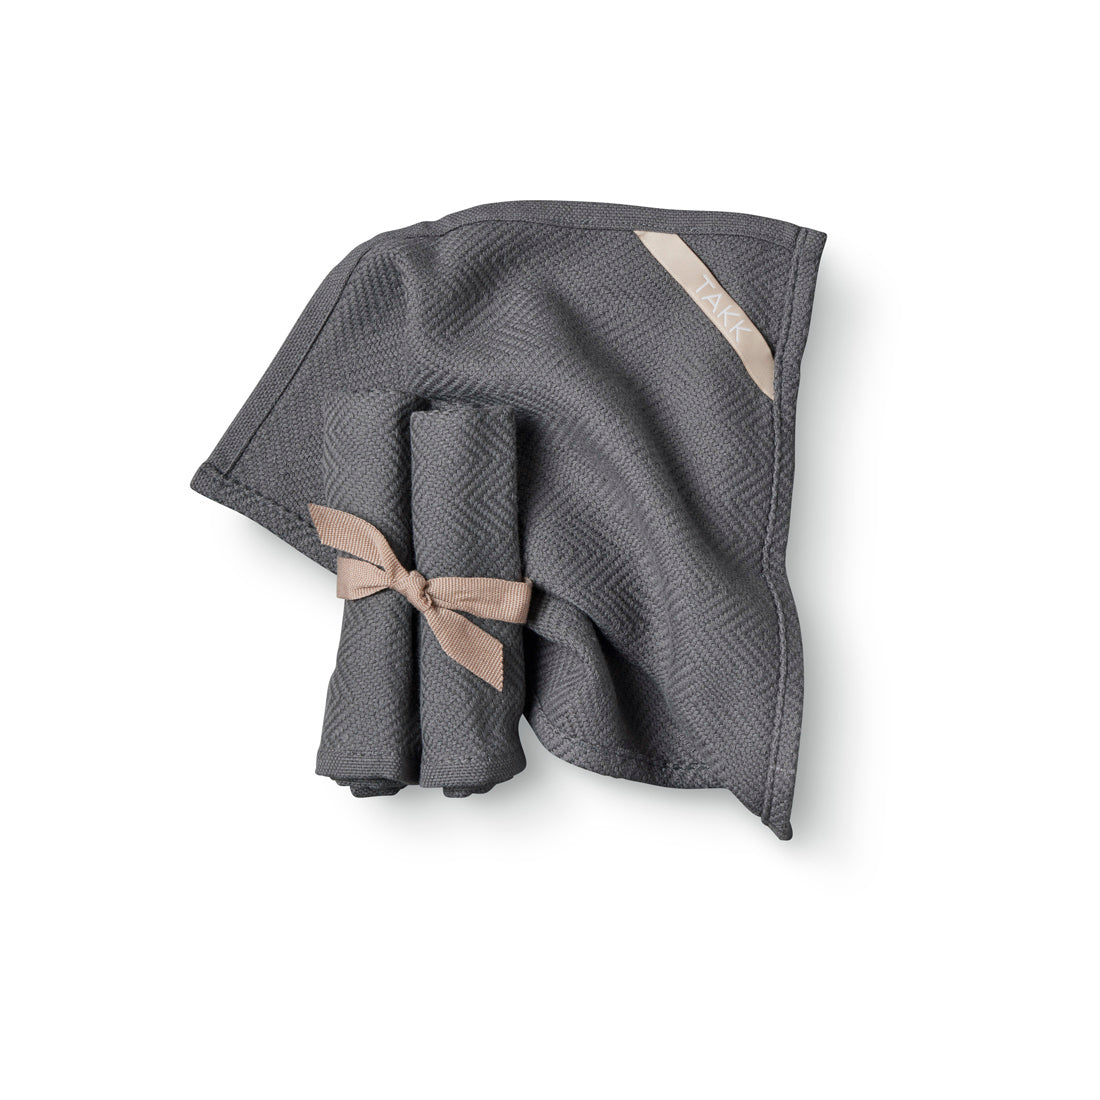 Luxurious face cloth - set of 3. Soft, absorbent, light weight, quick drying, aesthetically pleasing, with hanger loop. Also ideal as a a kitchen cloth. STANDARD 100 by OEKO-TEX®, eco-friendly certification. 100% quality cotton.